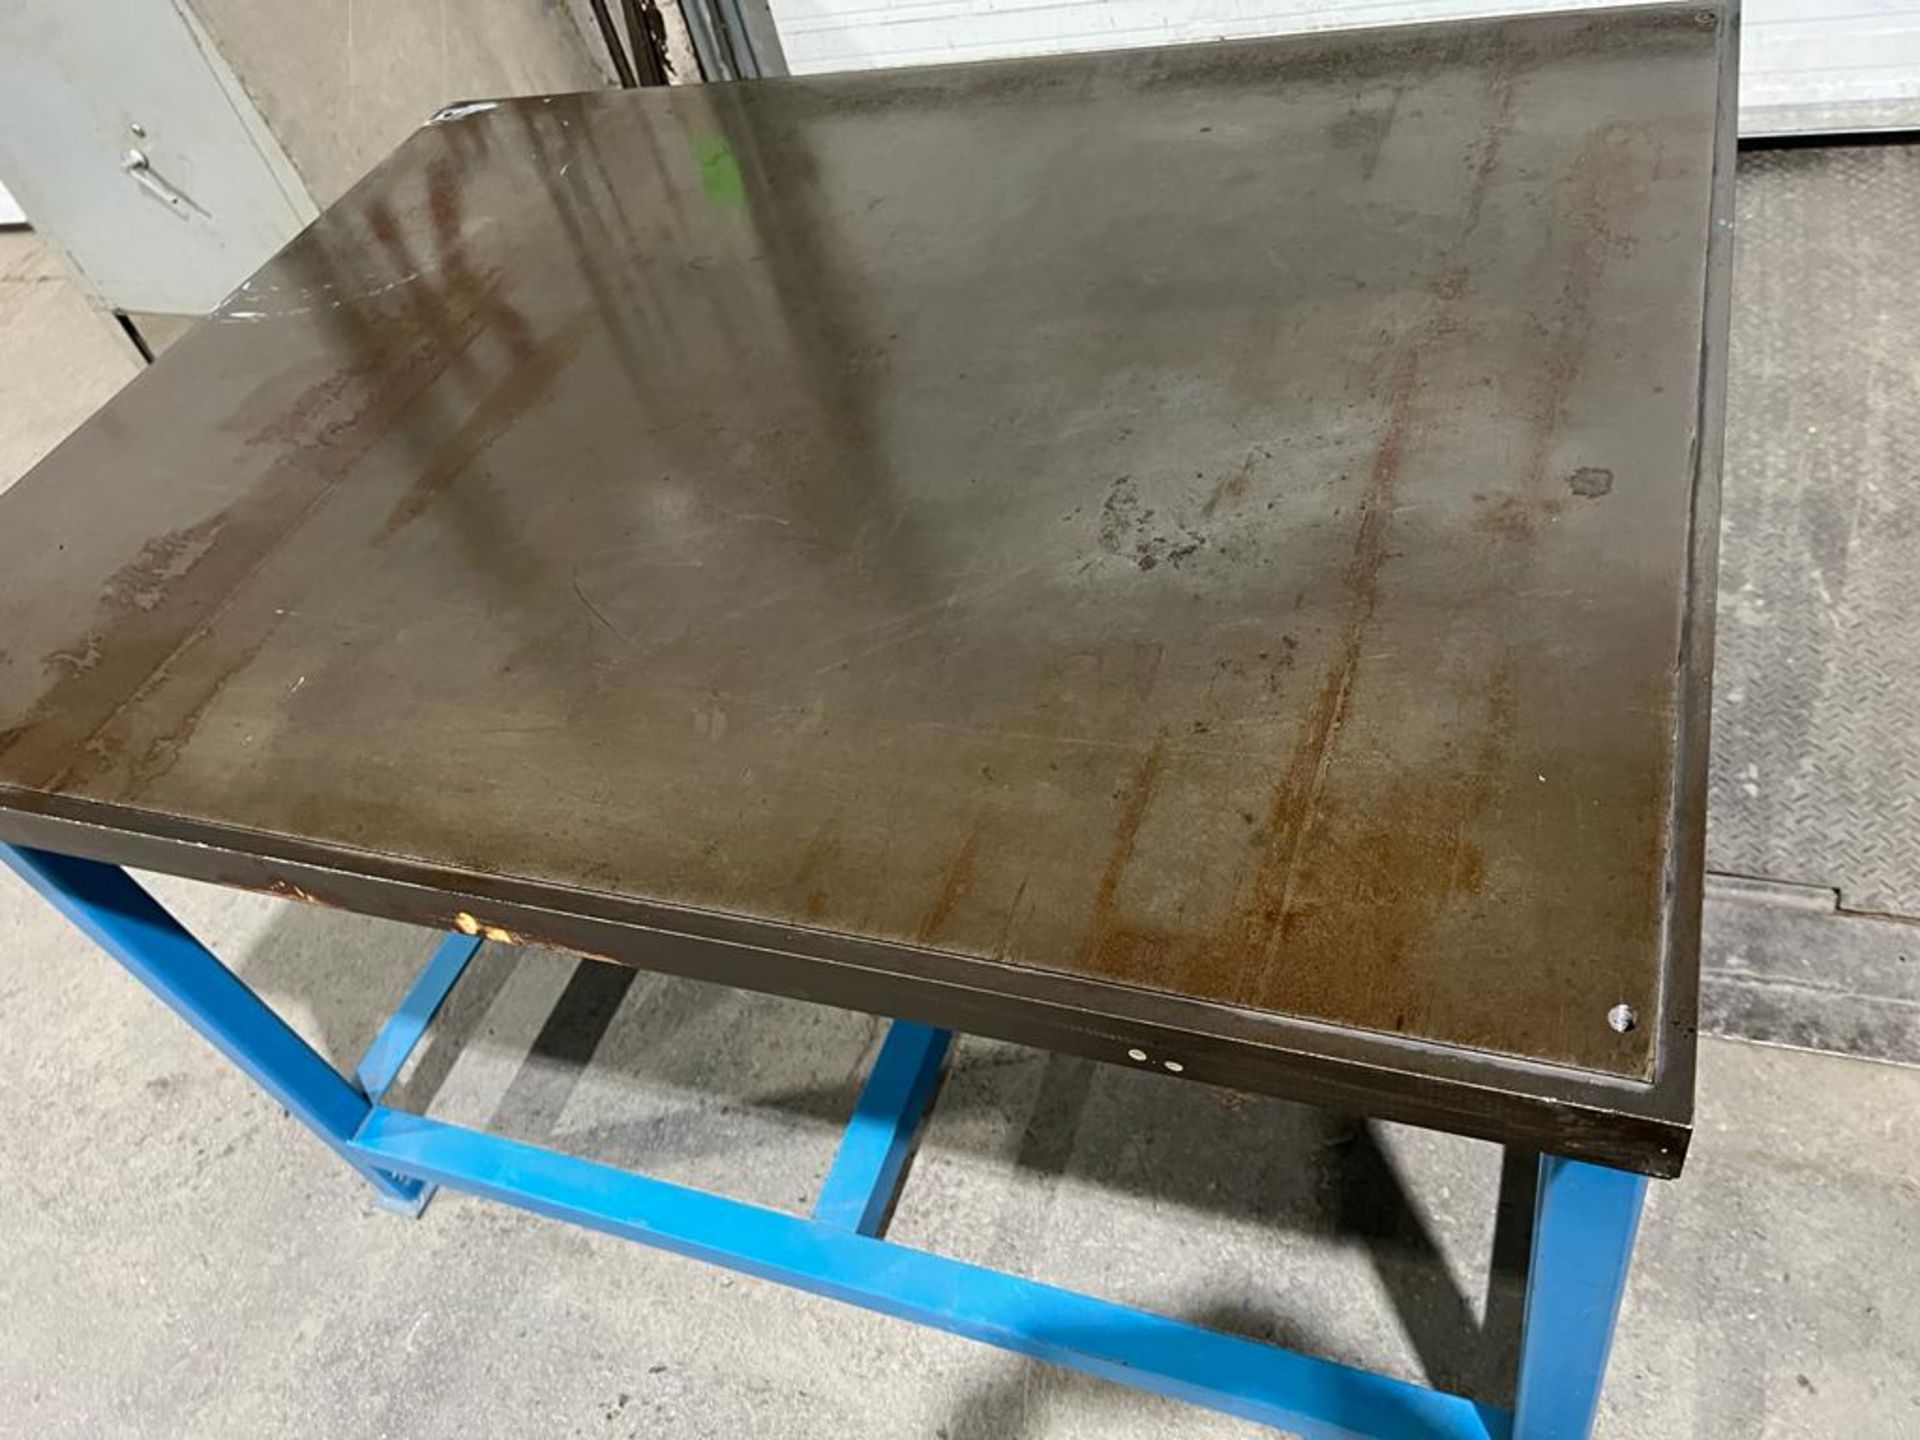 Heavy Duty Steel Work Table 50x40" tabletop dimensions - Image 2 of 3